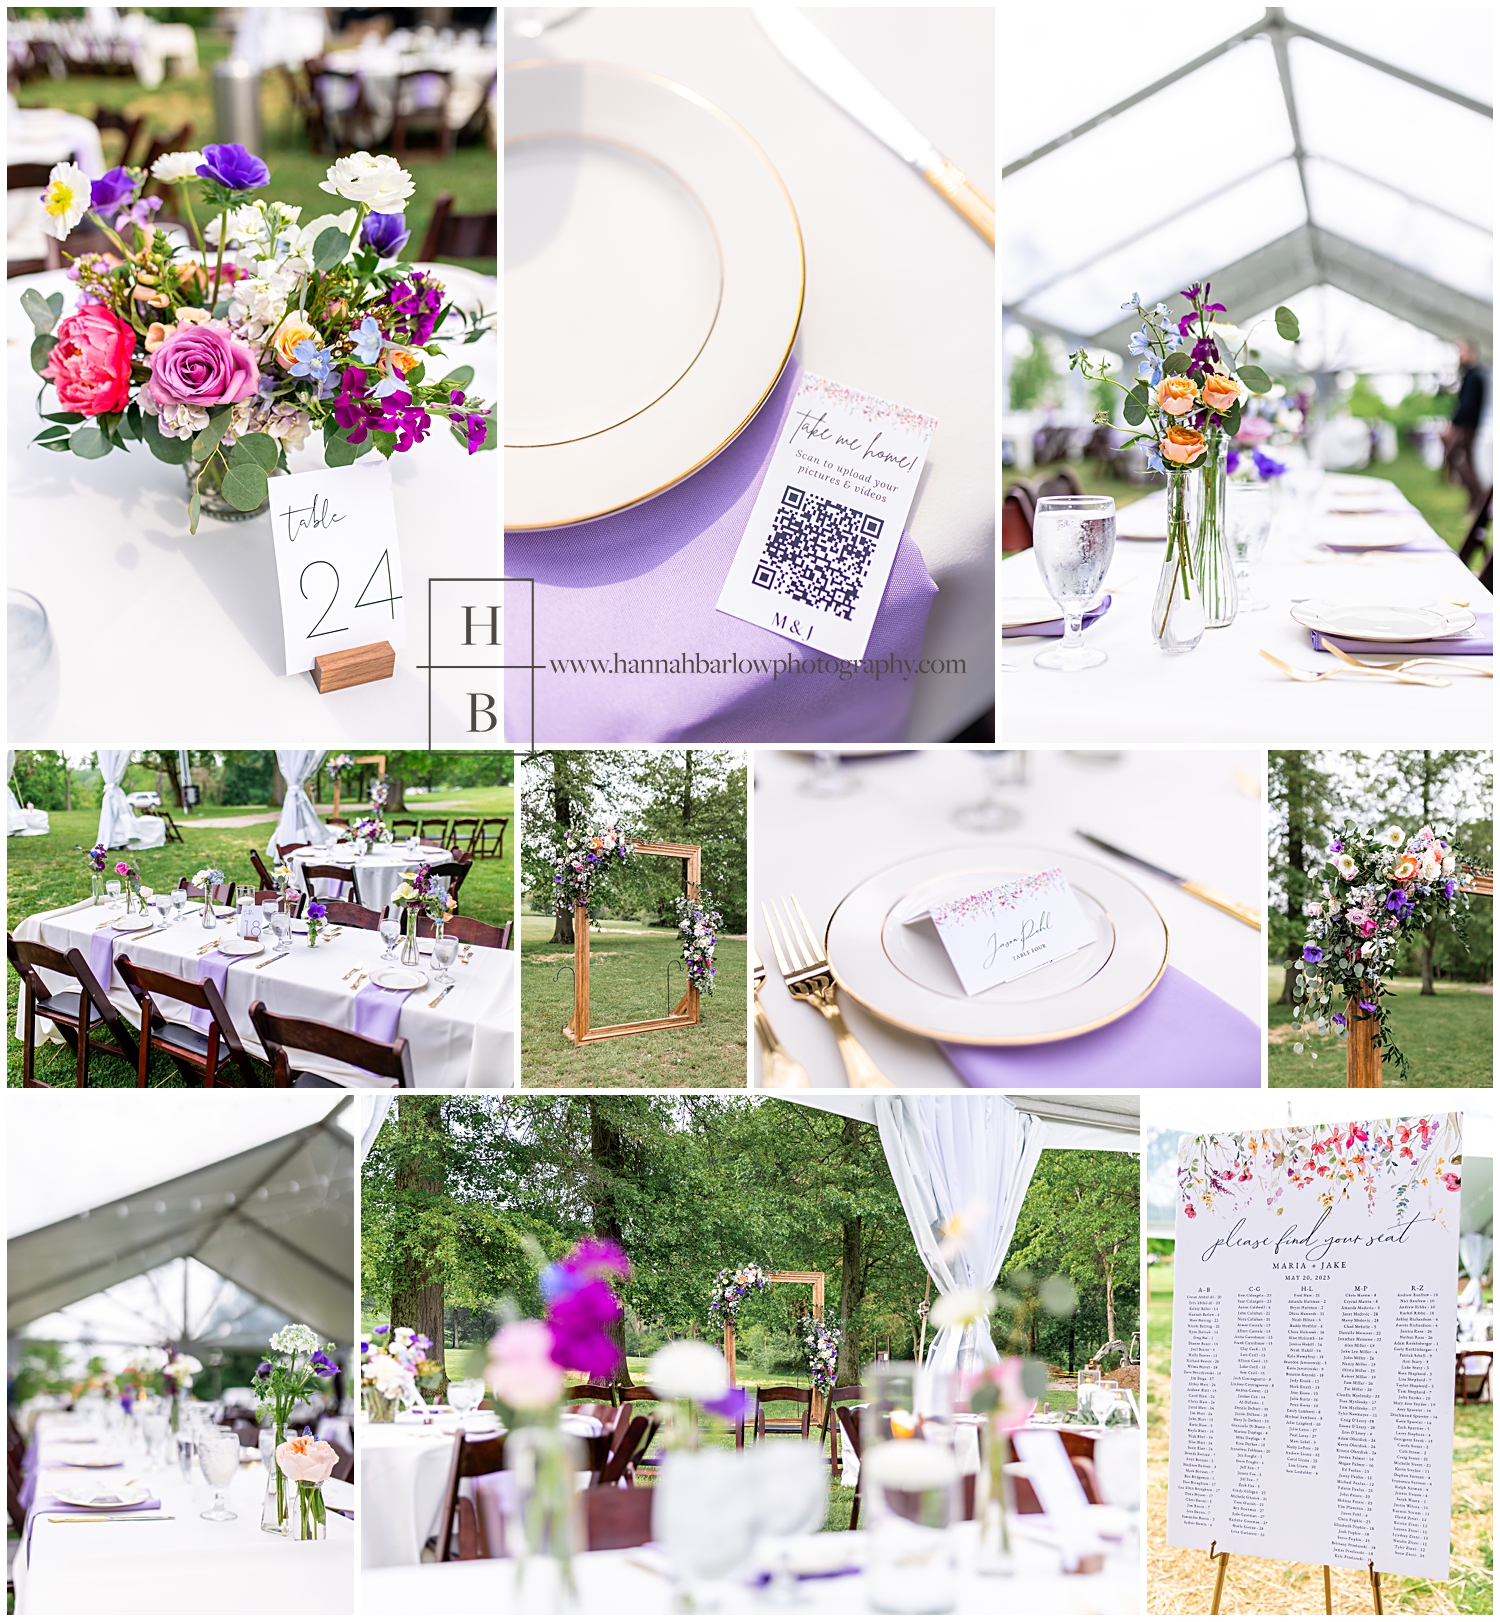 Colorful spring wedding reception details highlighted at Levinson Shelter tent wedding.